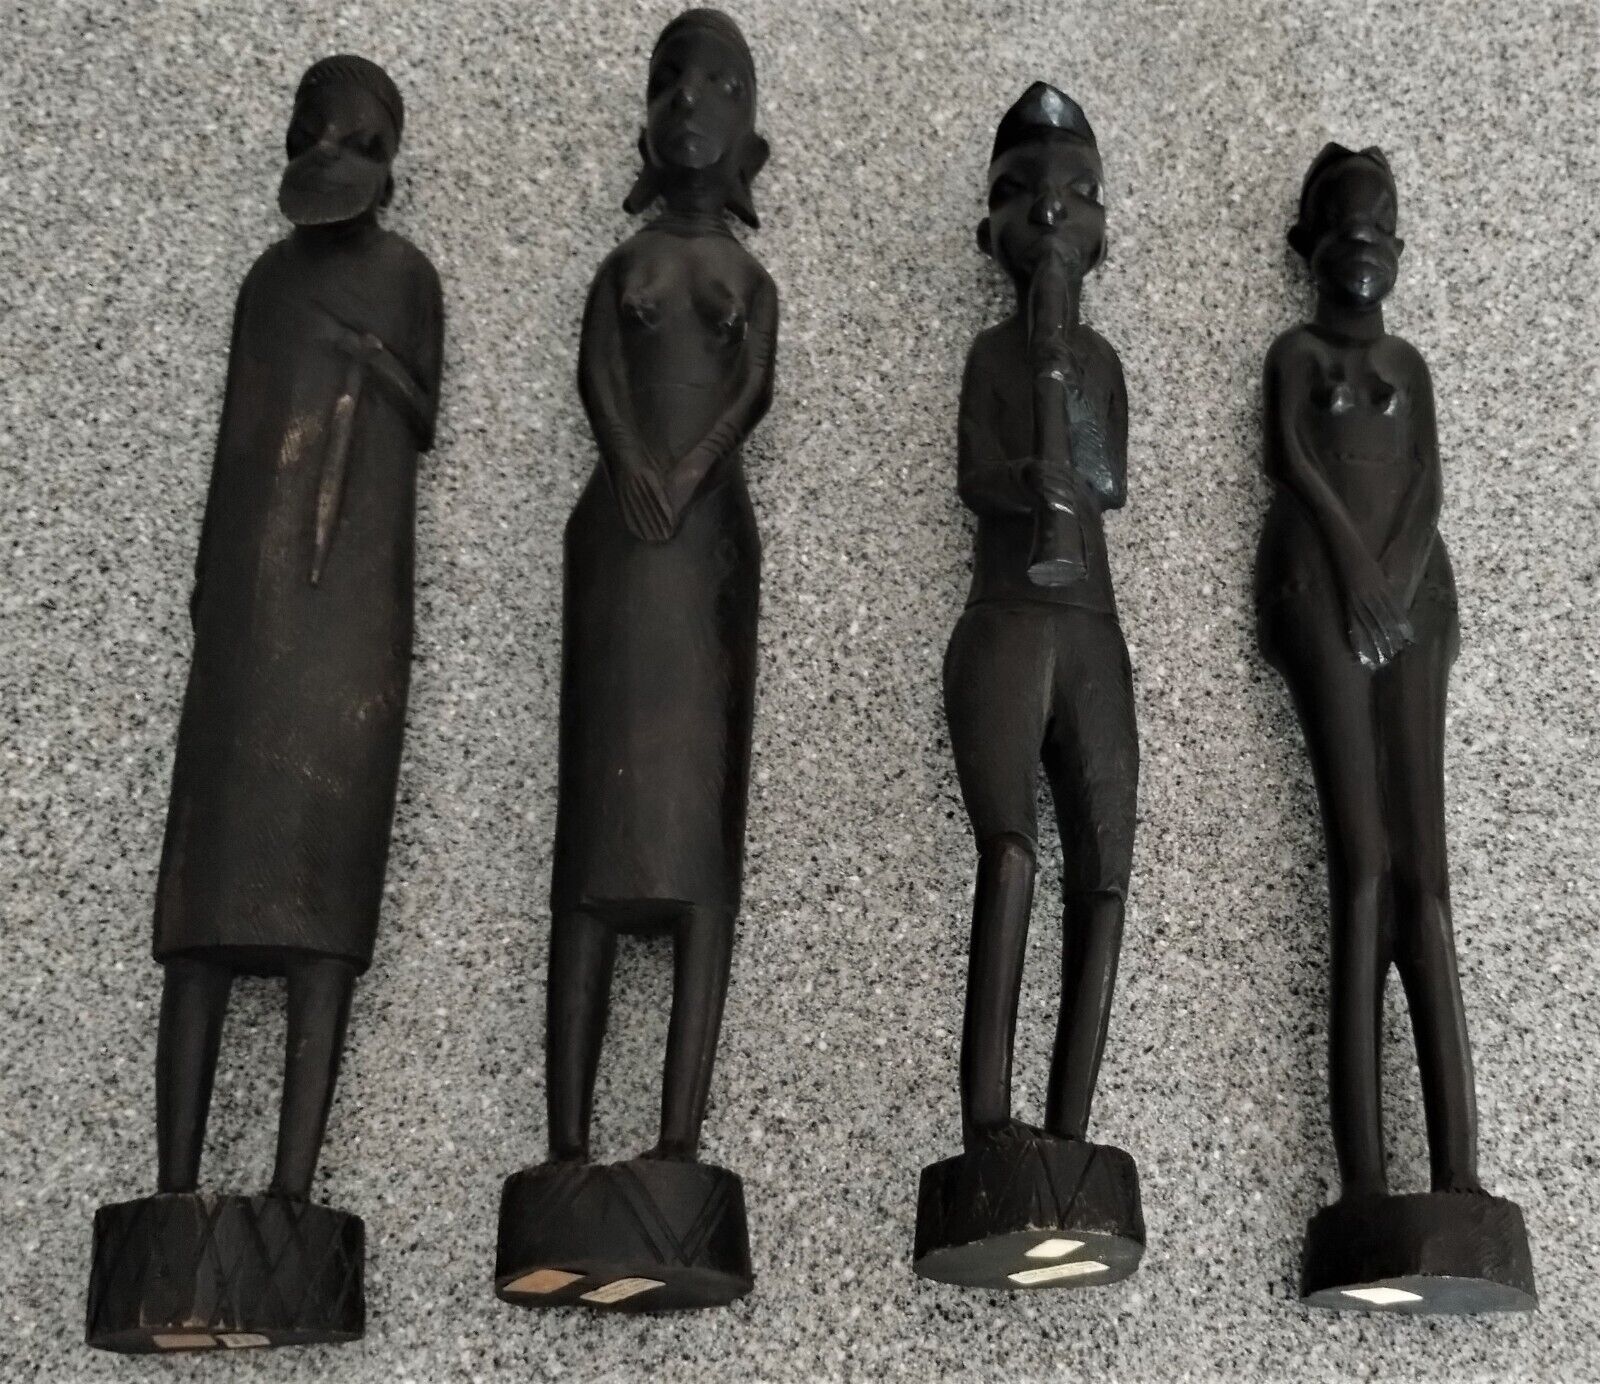 4 Genuine Besmo Product Tall Wood Ebony African Tribal Hand Carved Figures Kenya